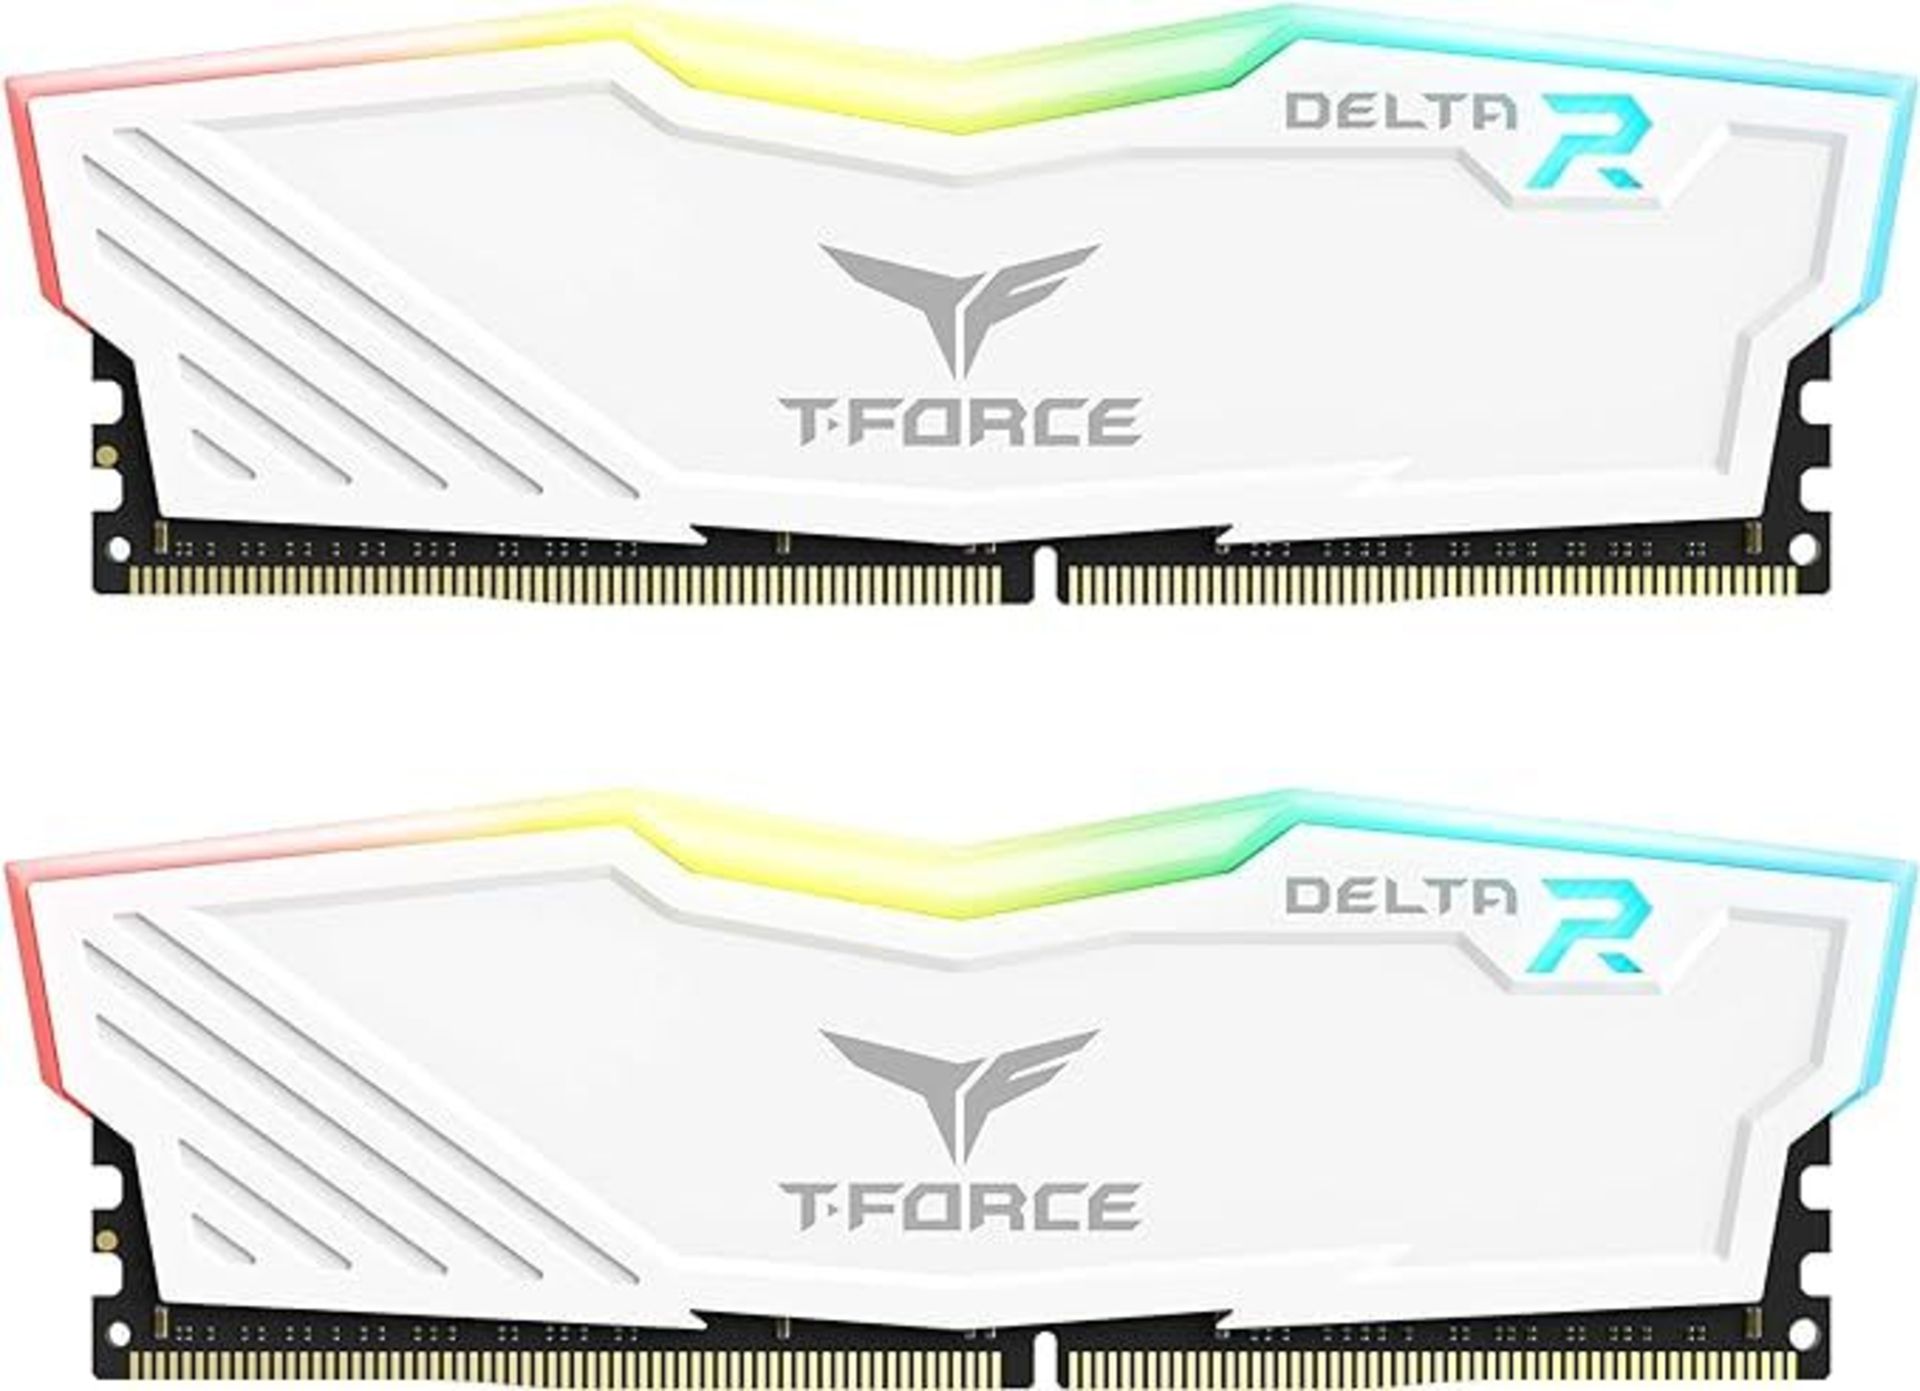 TEAMGROUP Team T-Force Delta RGB DDR4 Gaming Memory, 2 x 8 GB, 3600 Mhz, 288 Pin DIMM, White . -